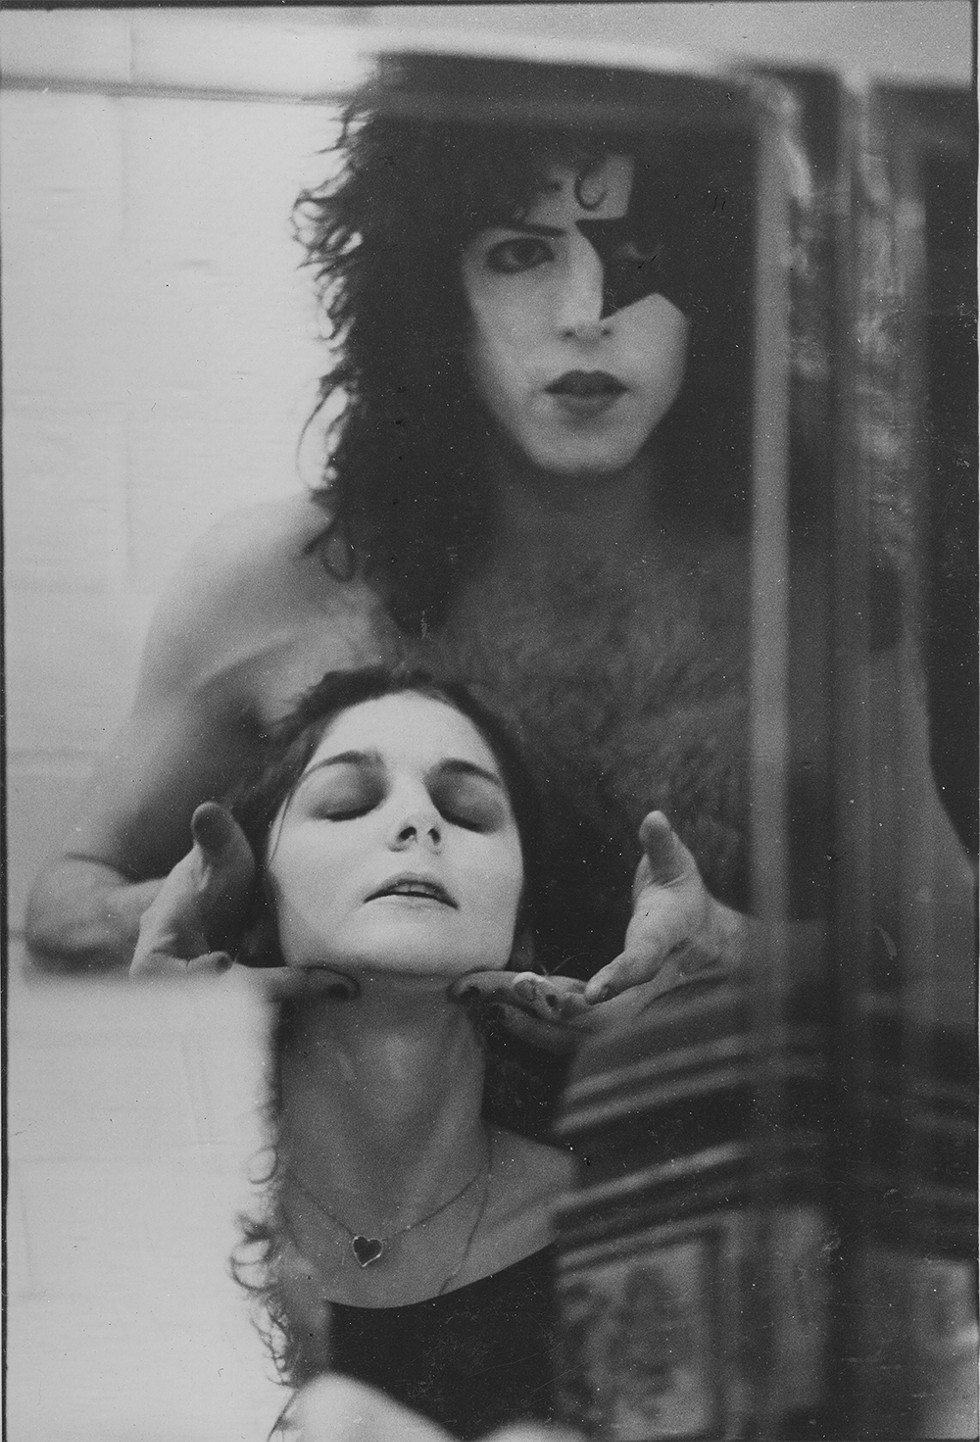 Jaan Uhelszki gets the KISS treatment with Paul Stanley. - BARRY LEVINE